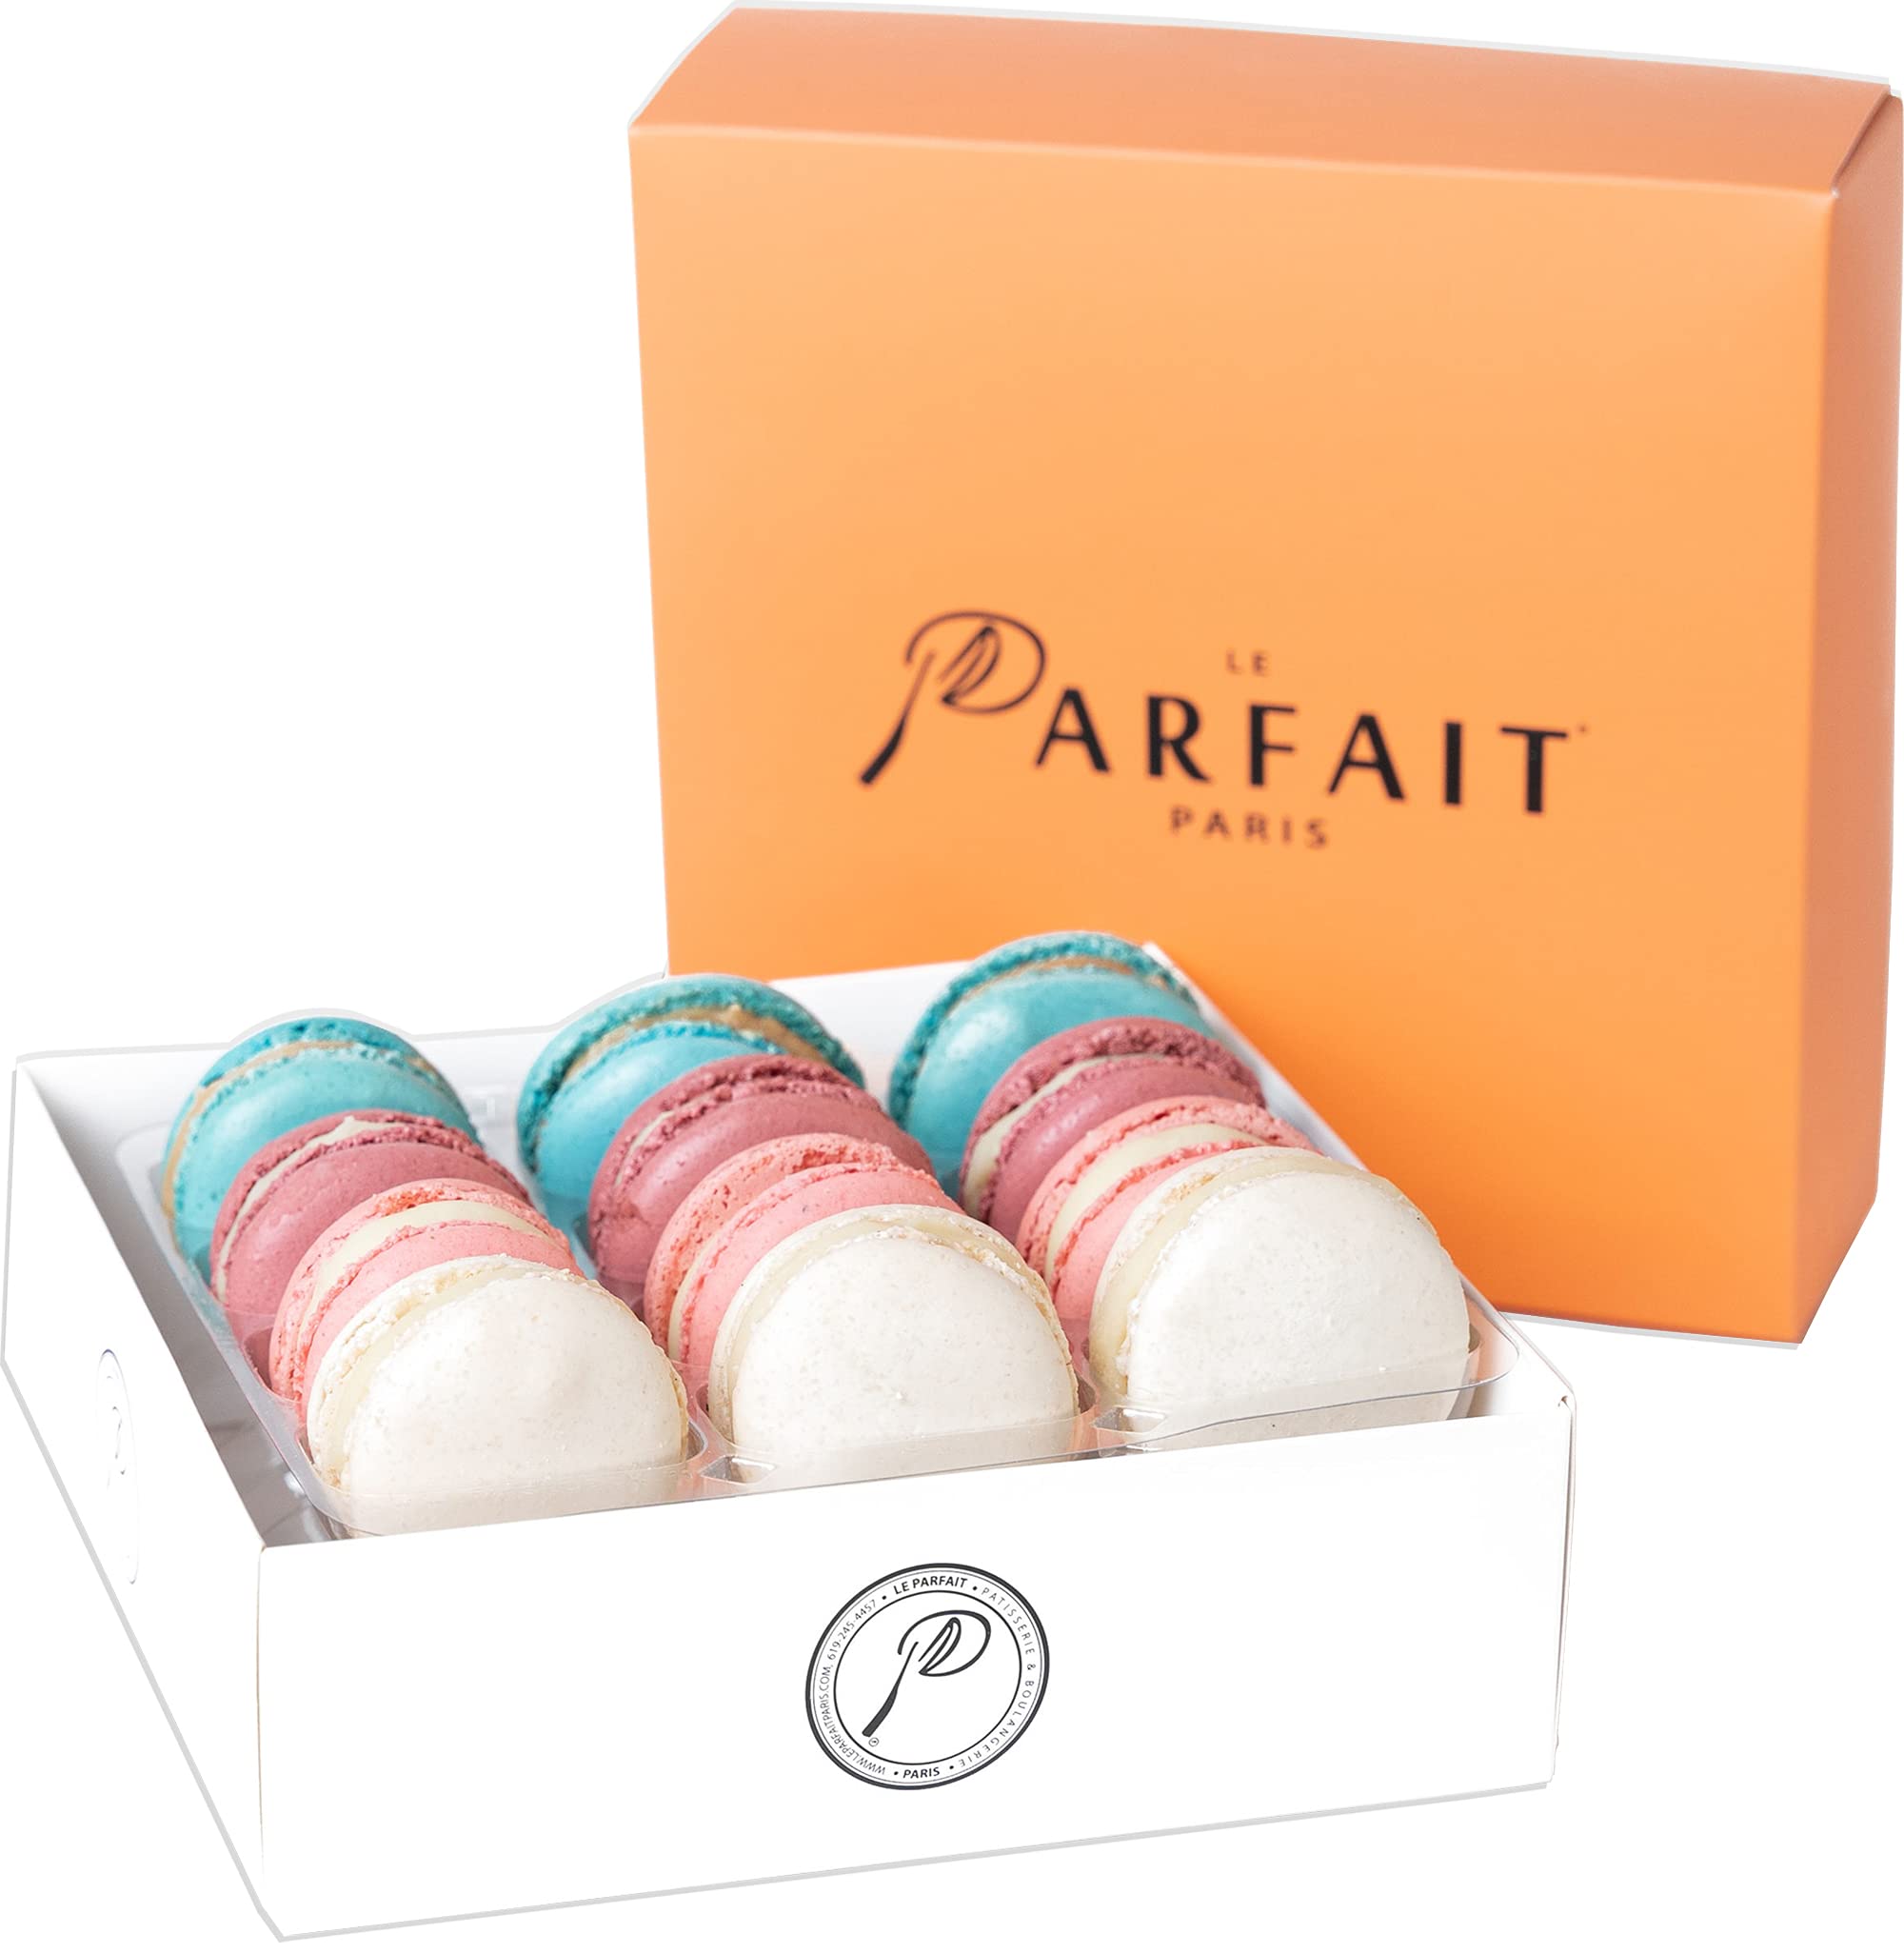 Le Parfait Paris: Garden Bloom French Macarons - Gourmet Desserts Snack Box  for Baby Shower, Birthdays, Mothers